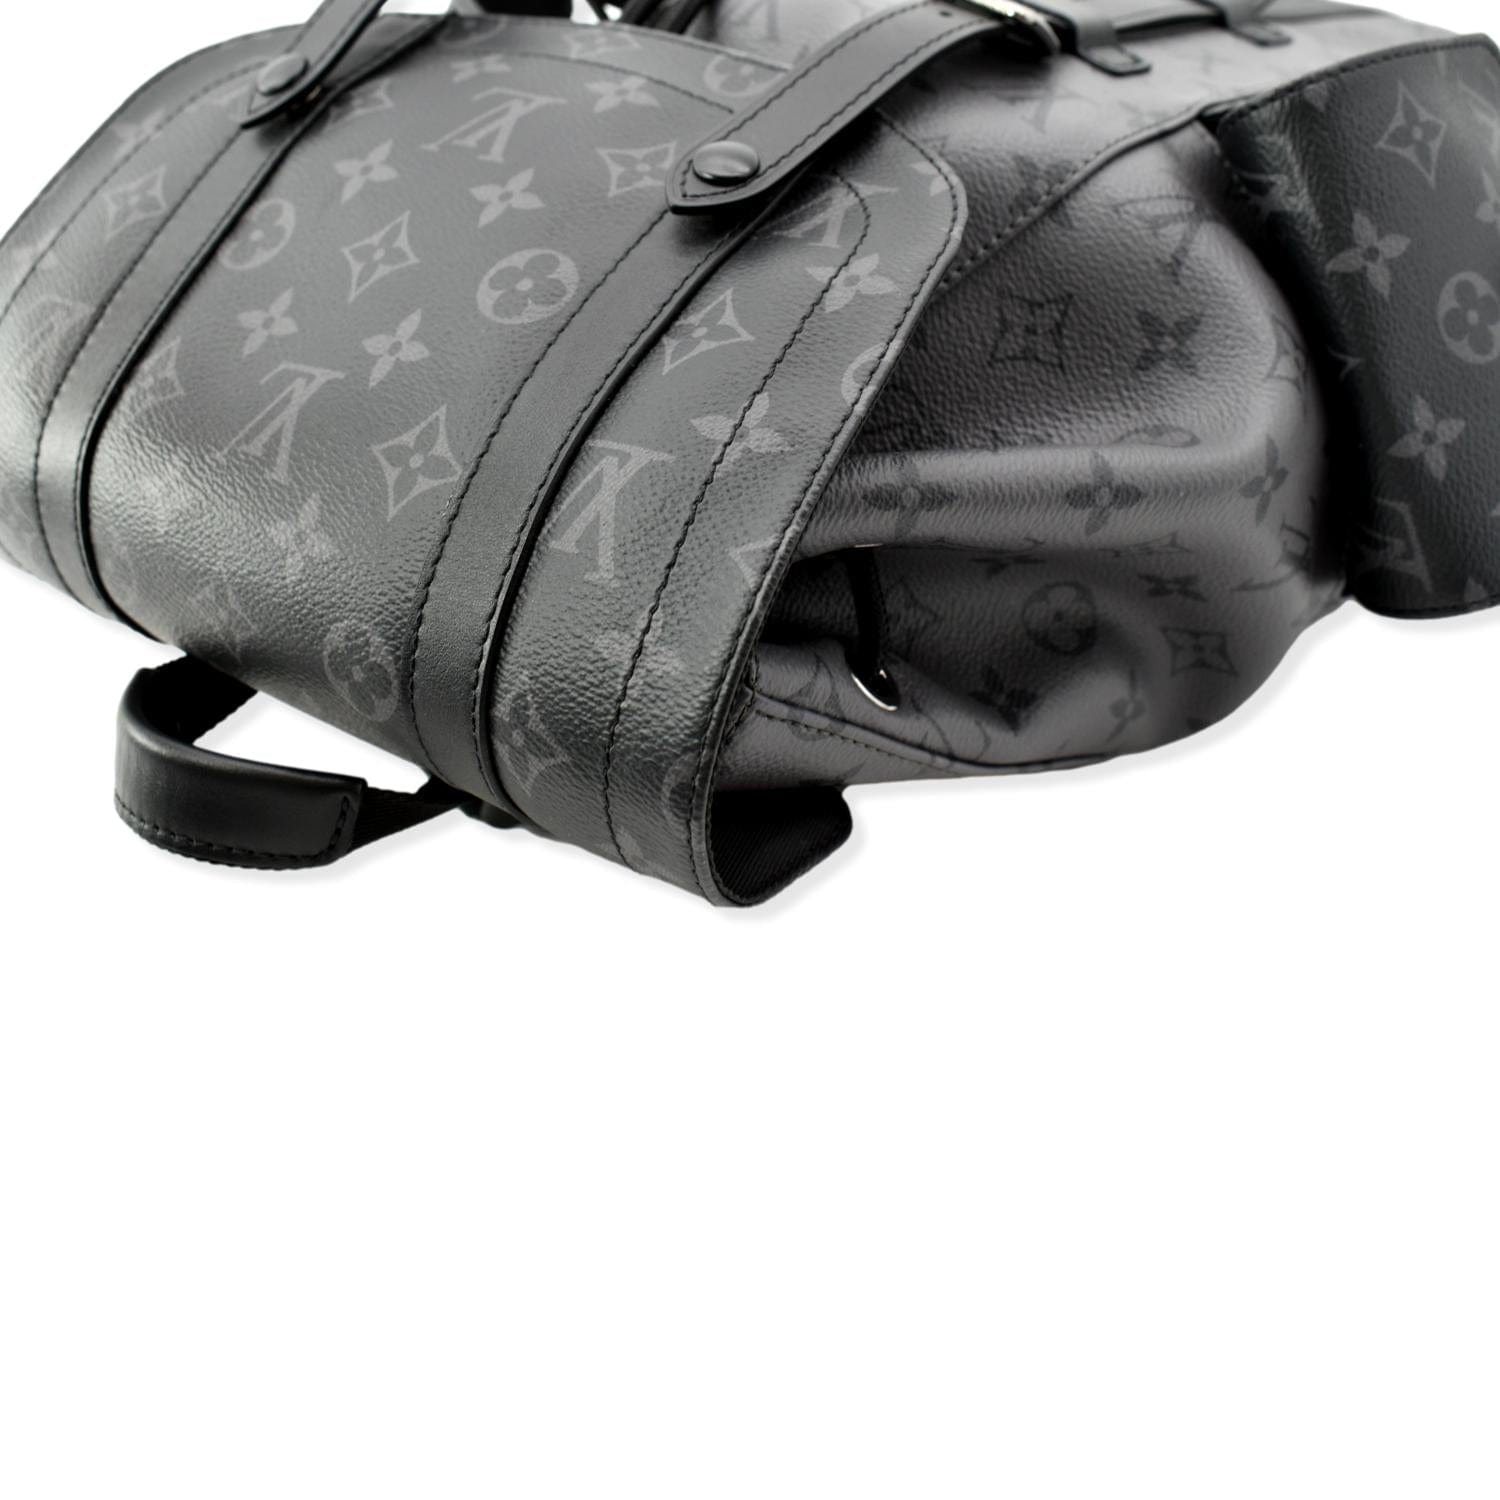 lv backpack black and grey